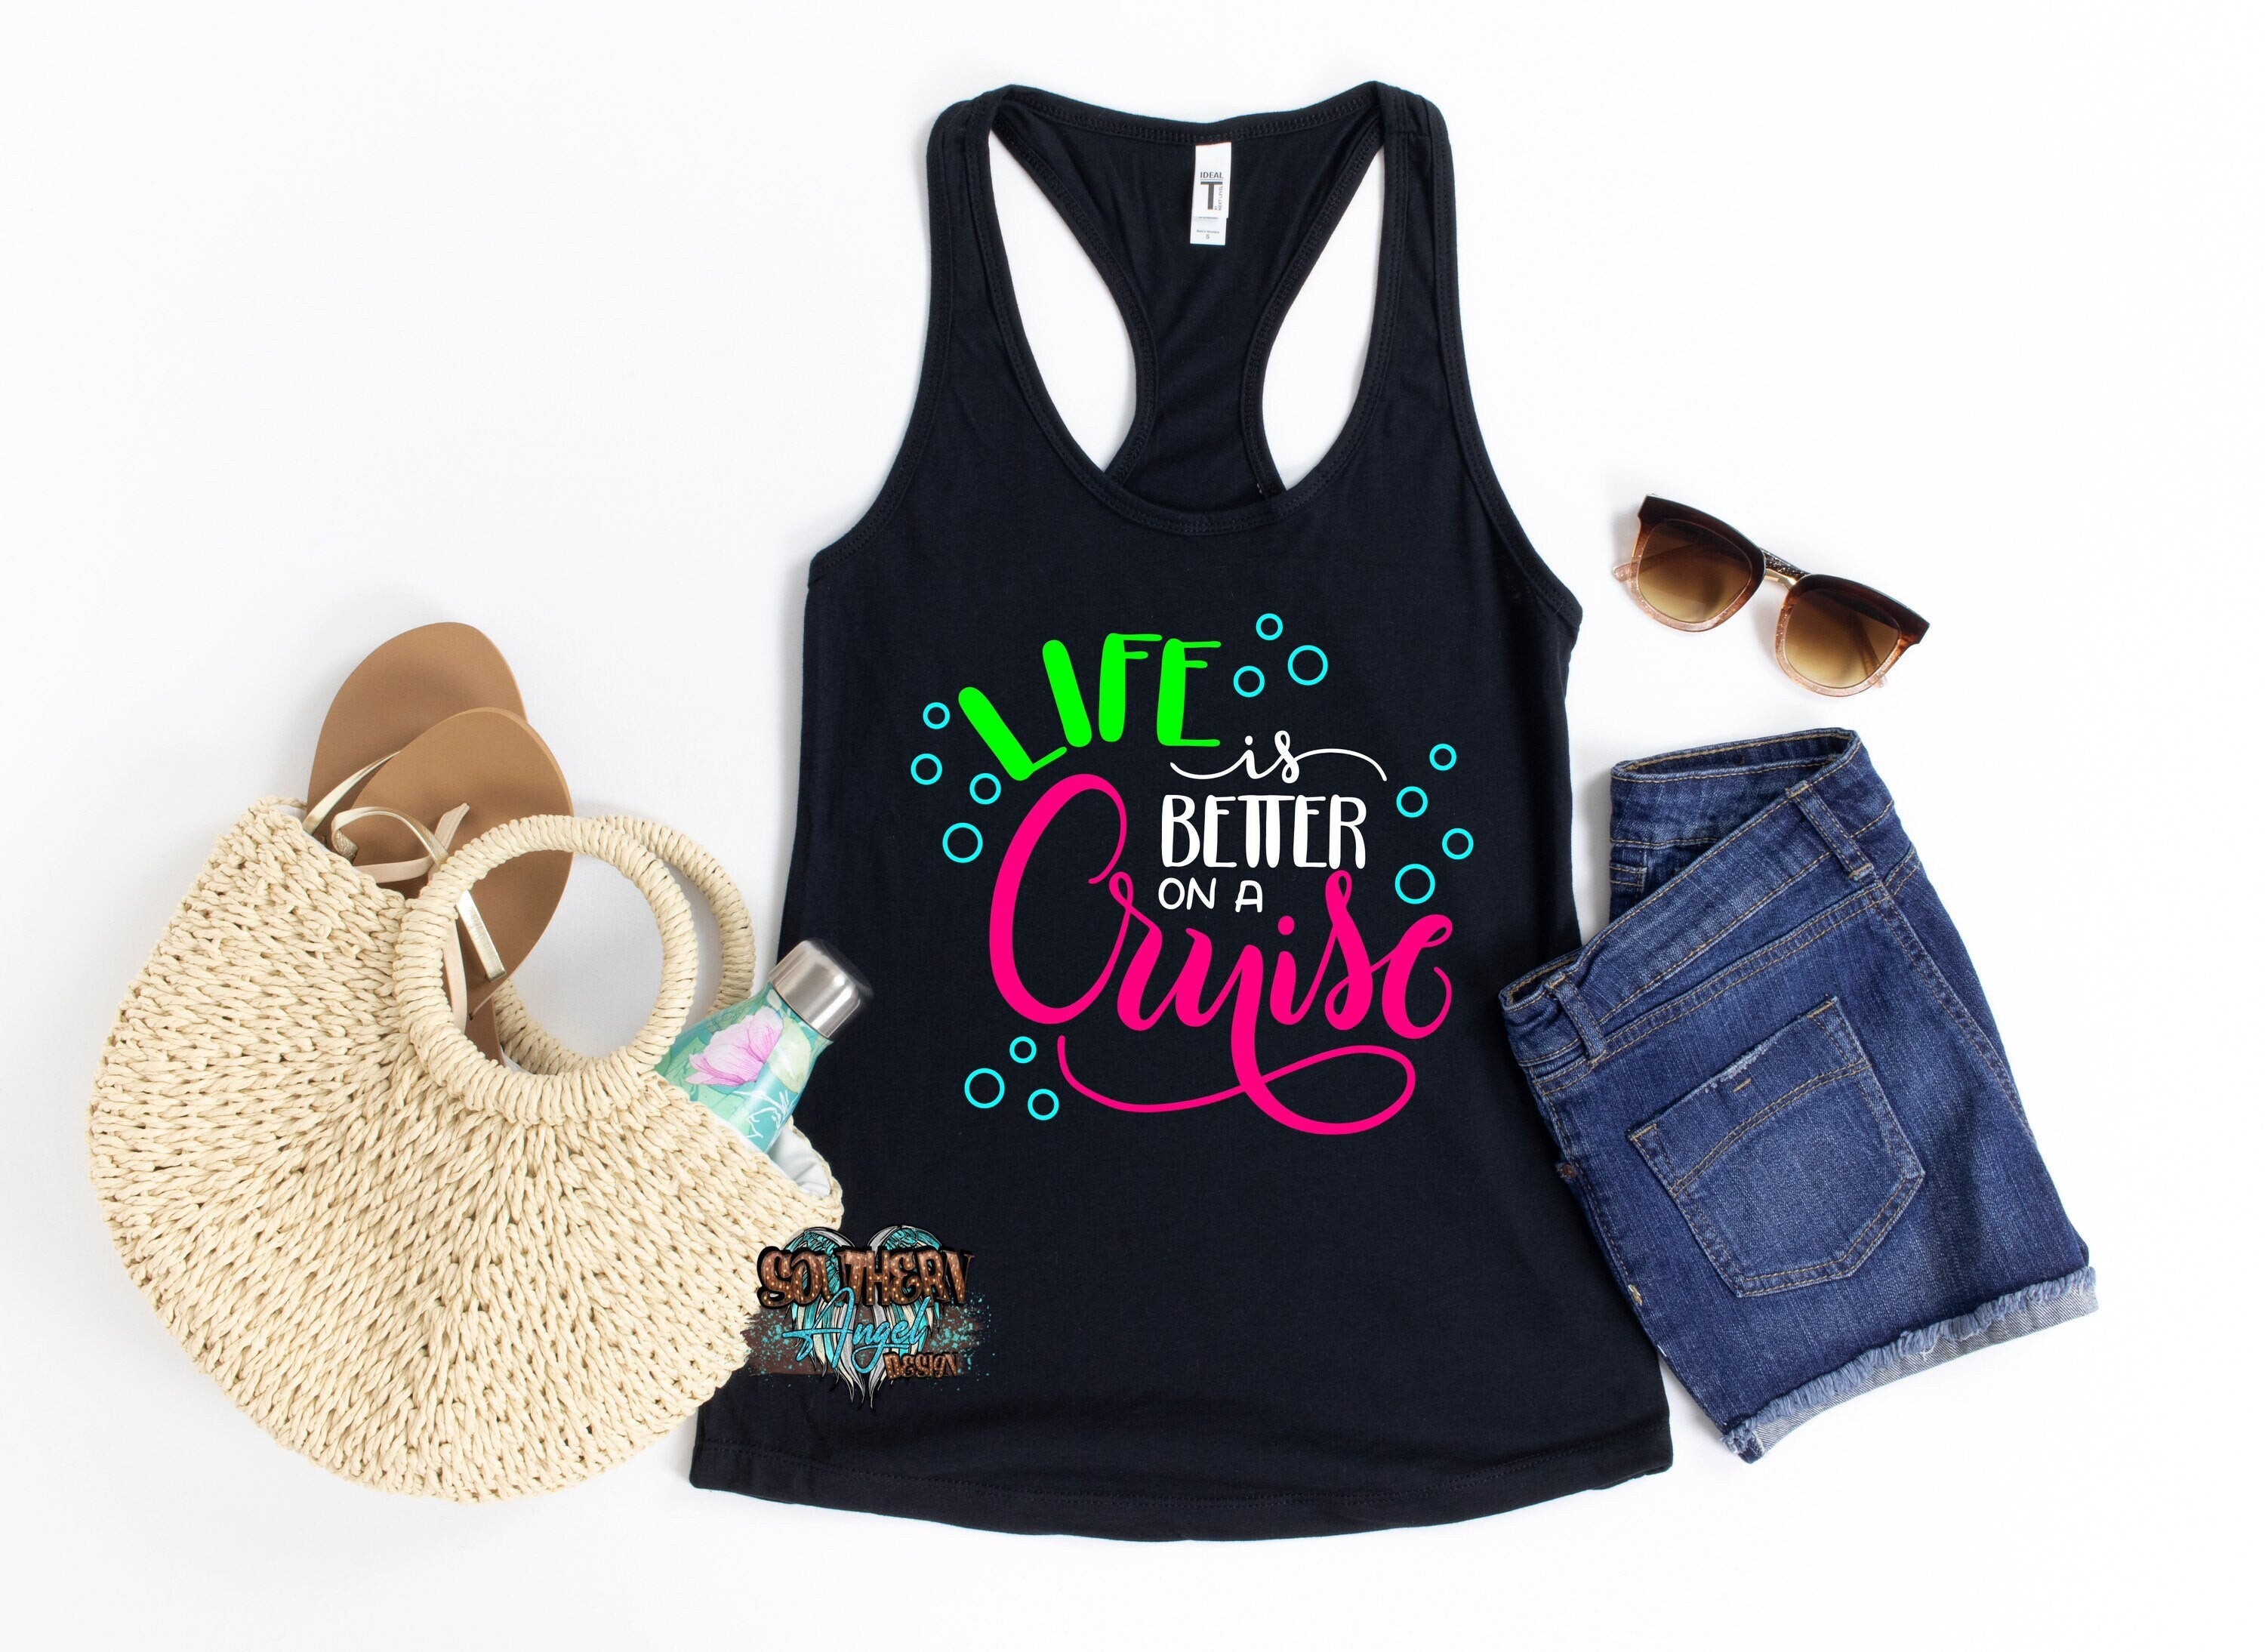 Life Is Better On A Cruise tank | Summer tank | Cruise tank top | Vacation tank | Swimsuit coverup | Beach tank | Party tank | Drinking tank